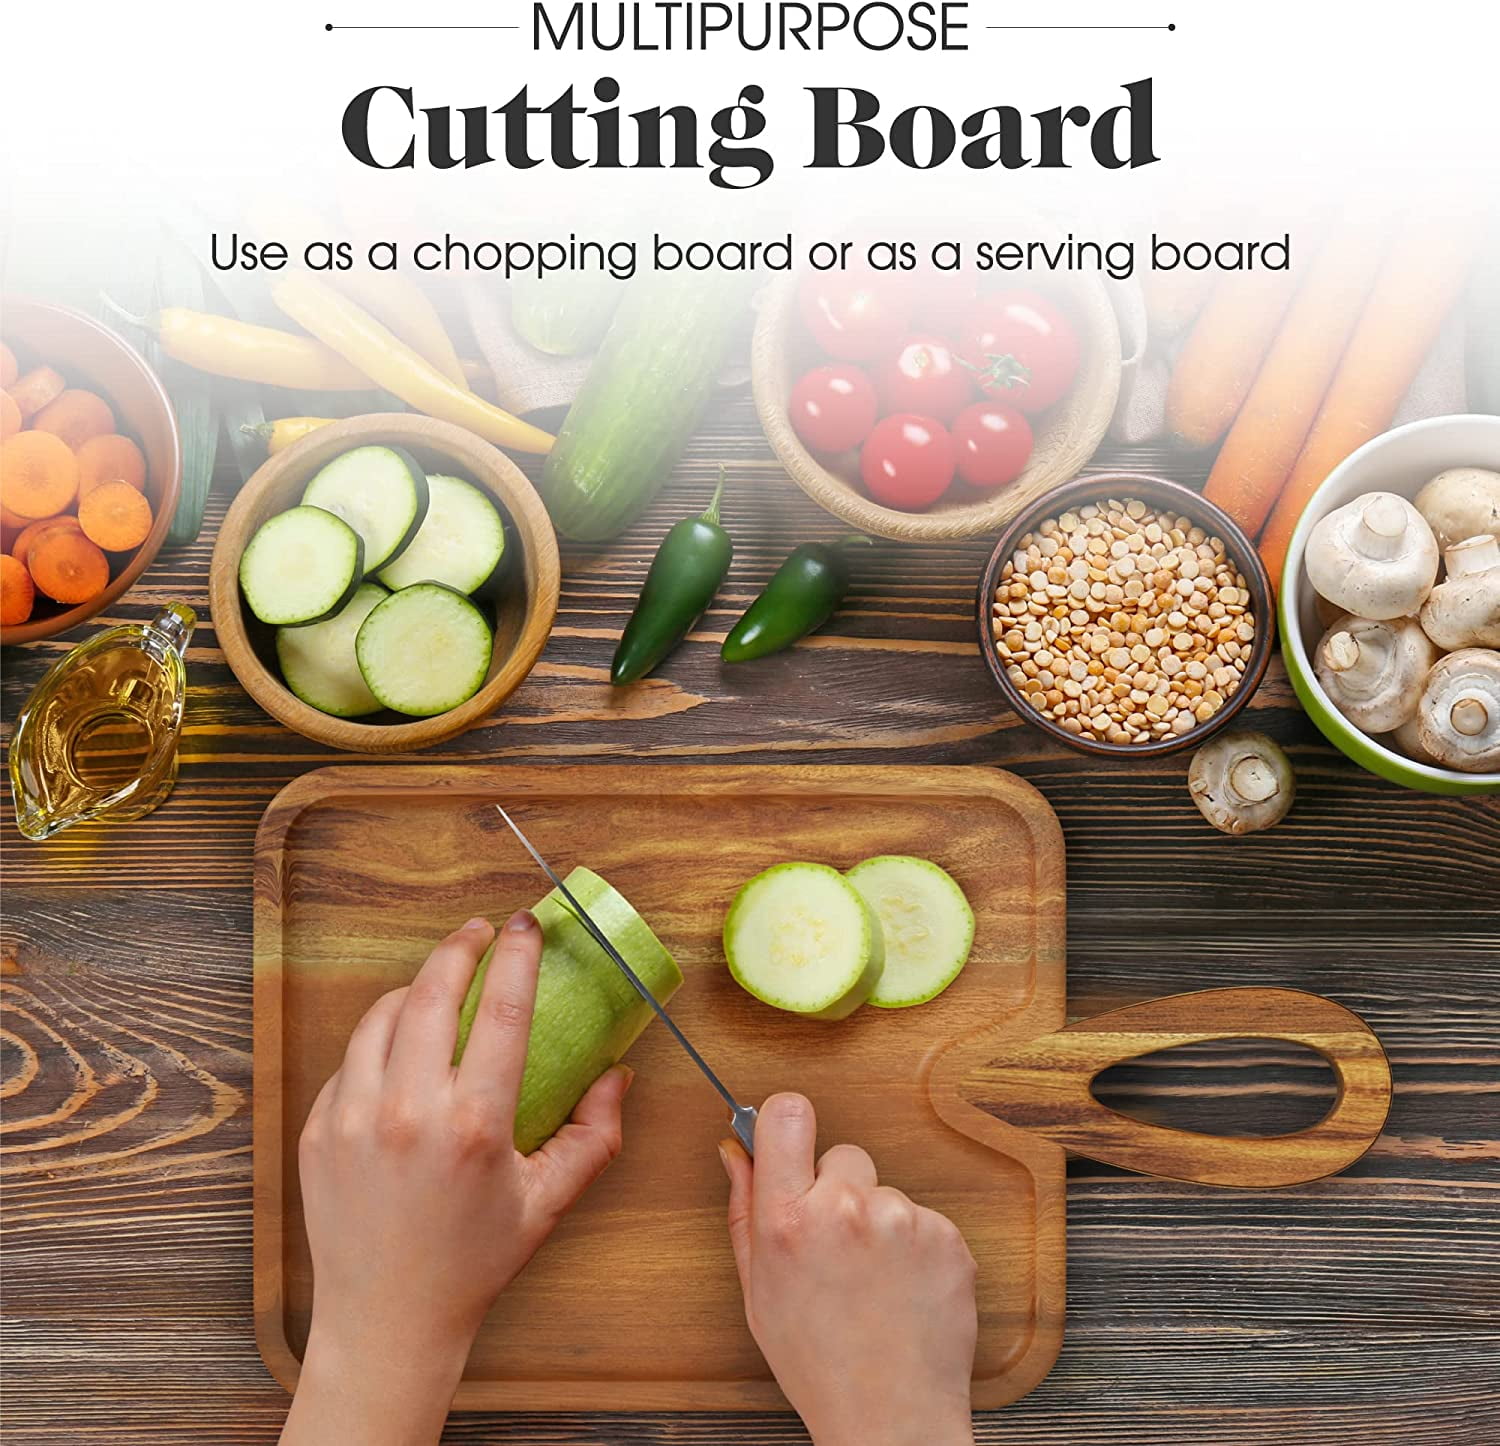 American Atelier's Acacia Wood Cutting Board with Metal Accent | Large  Chopping Board | Serving Tray for Cheese, Meats, Charcuterie Boards |  15.82” x